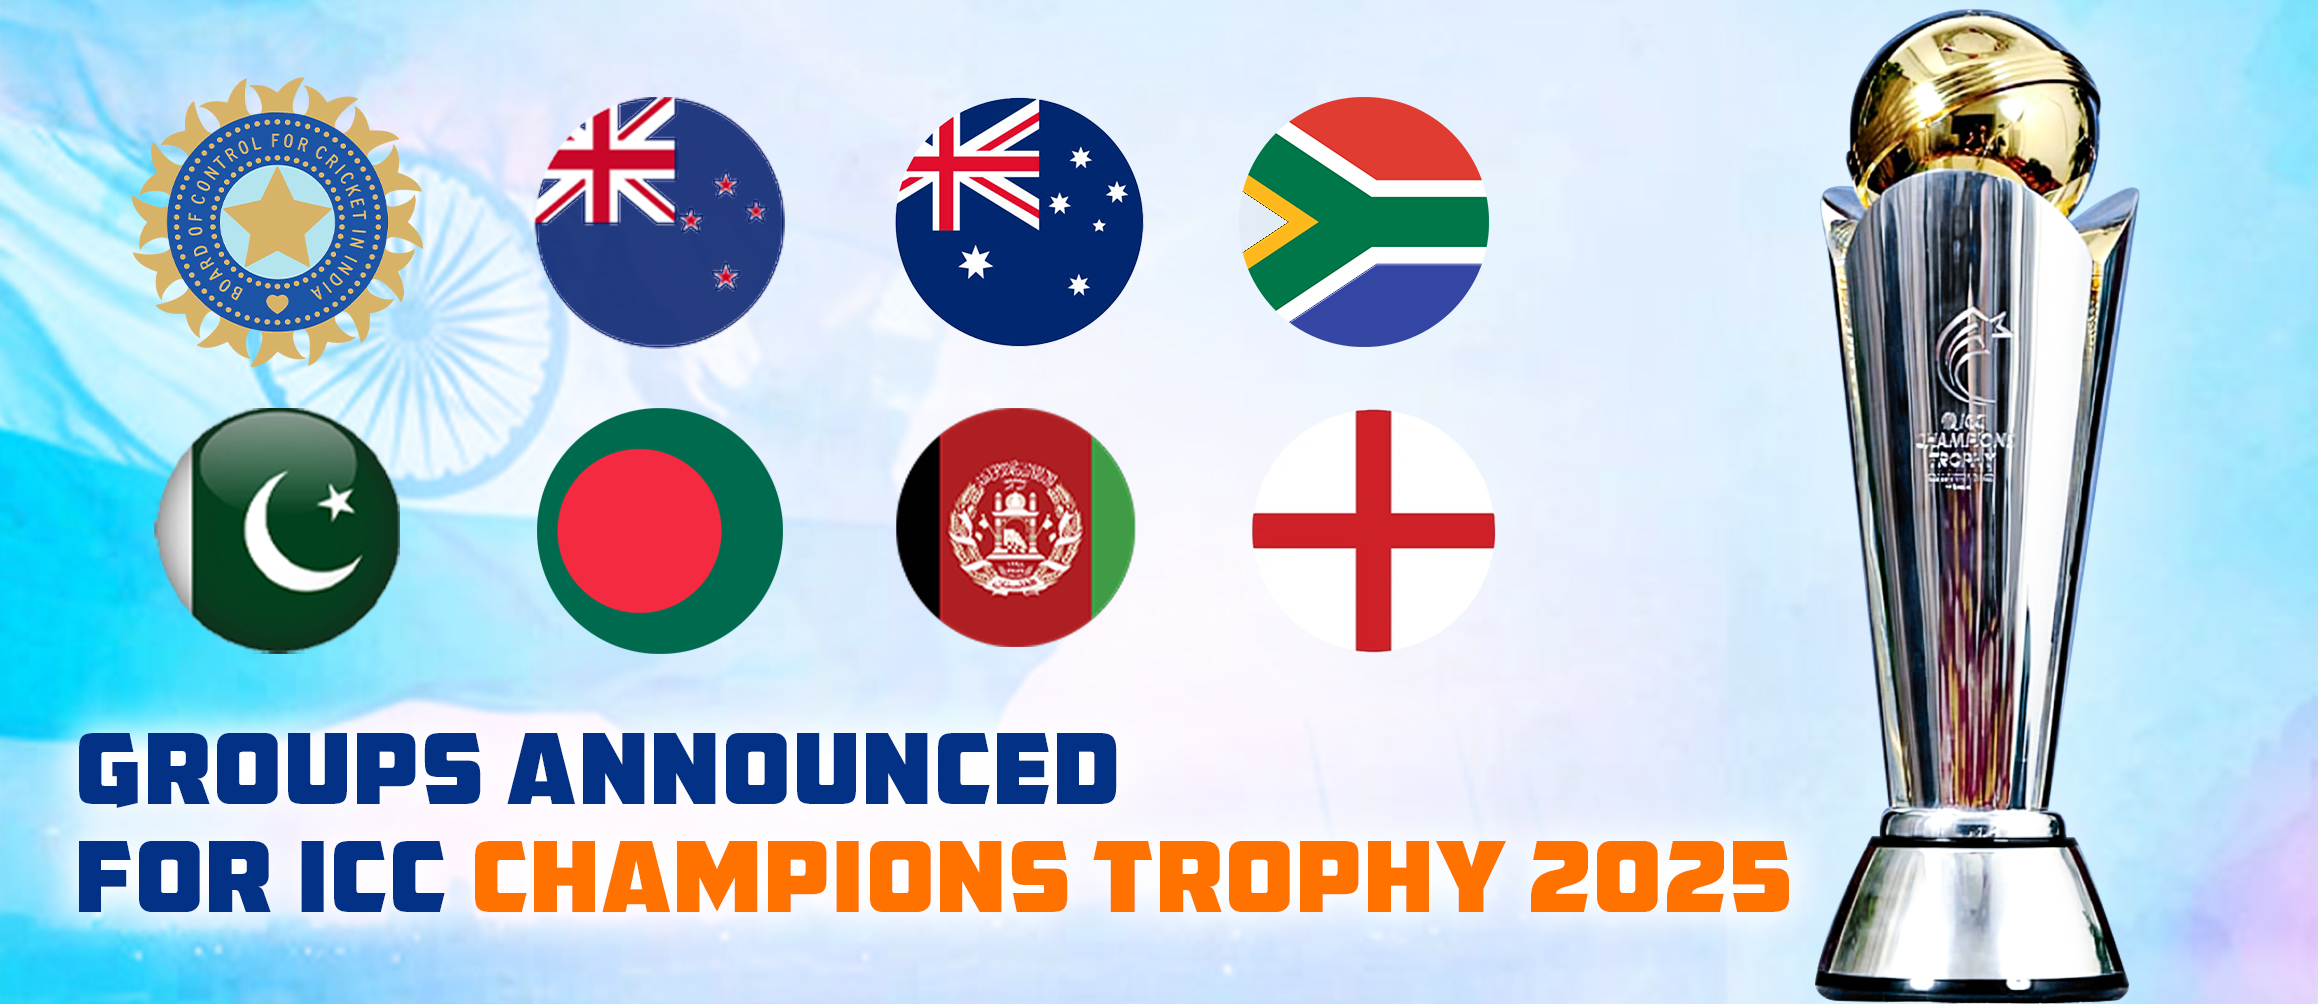 Groups announced for ICC Champions Trophy 2025